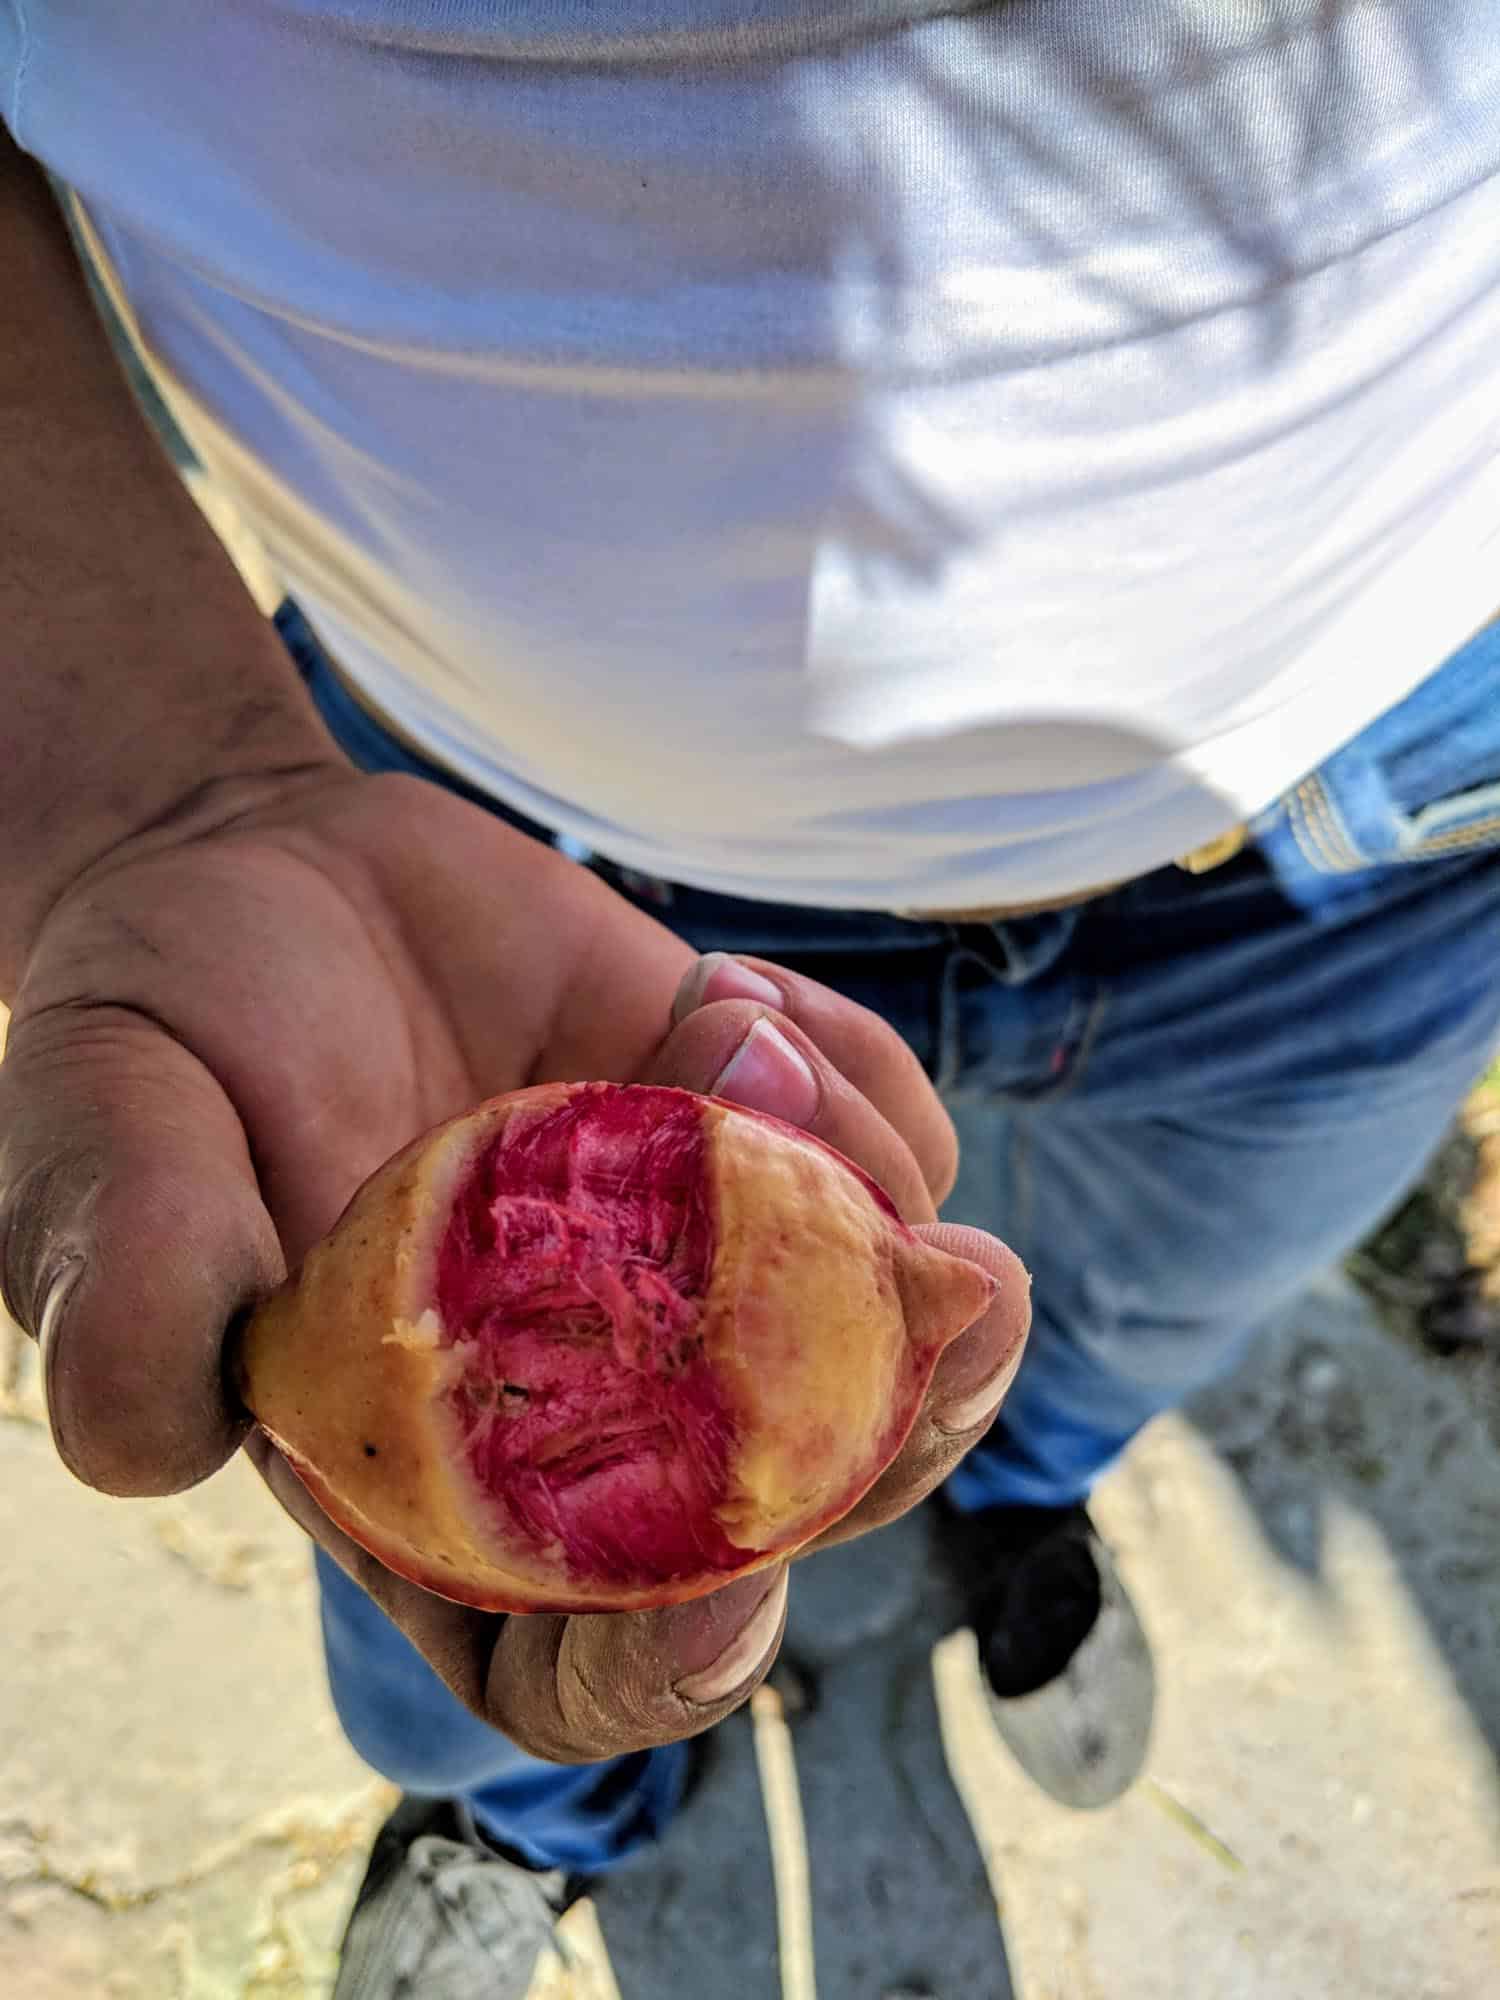 Jamaican almond fruit in a man's hand.